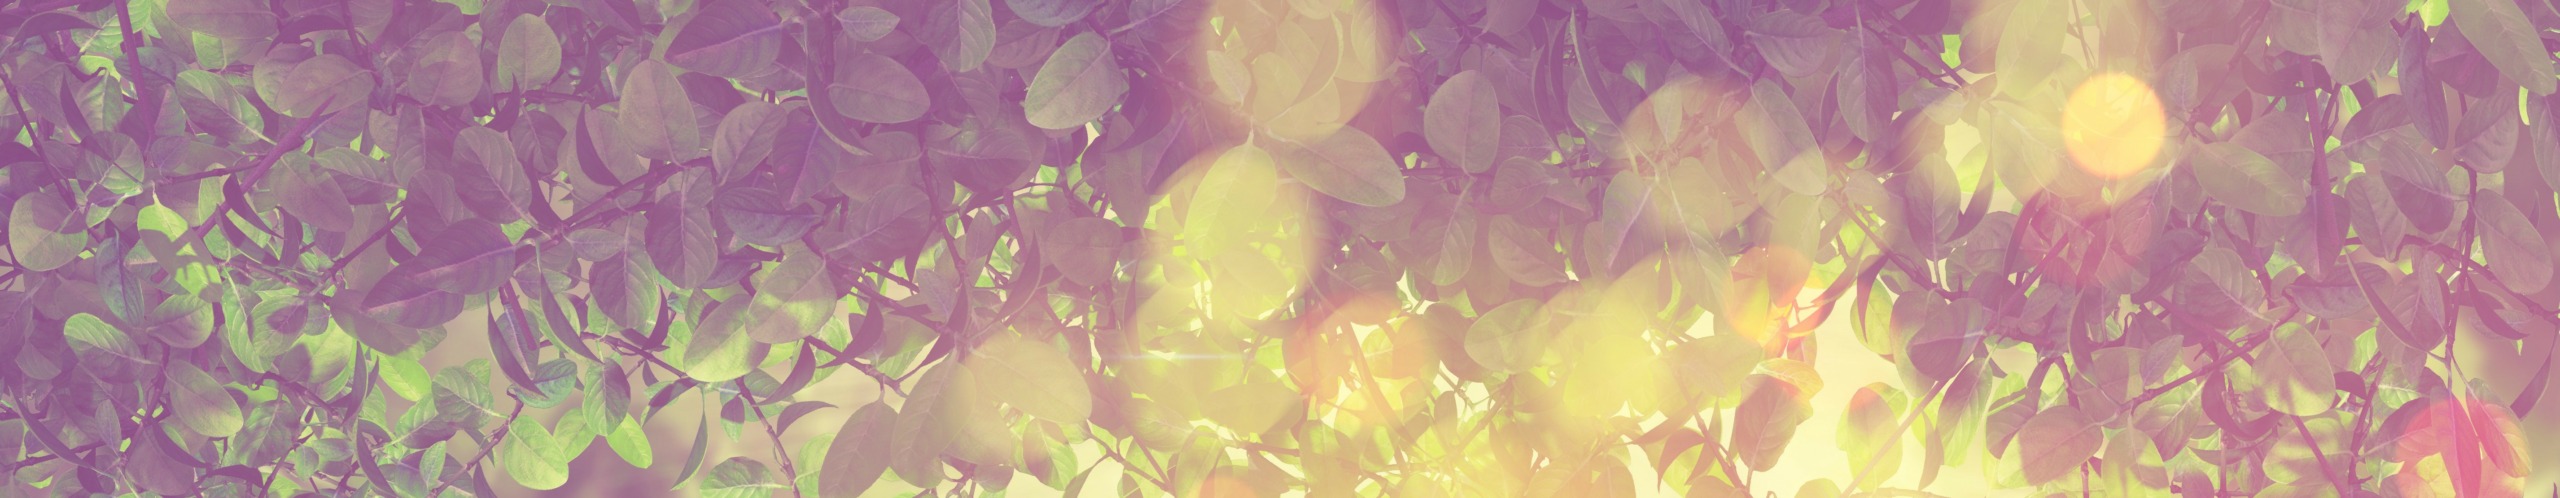 3D leaves and sunlight with retro effect